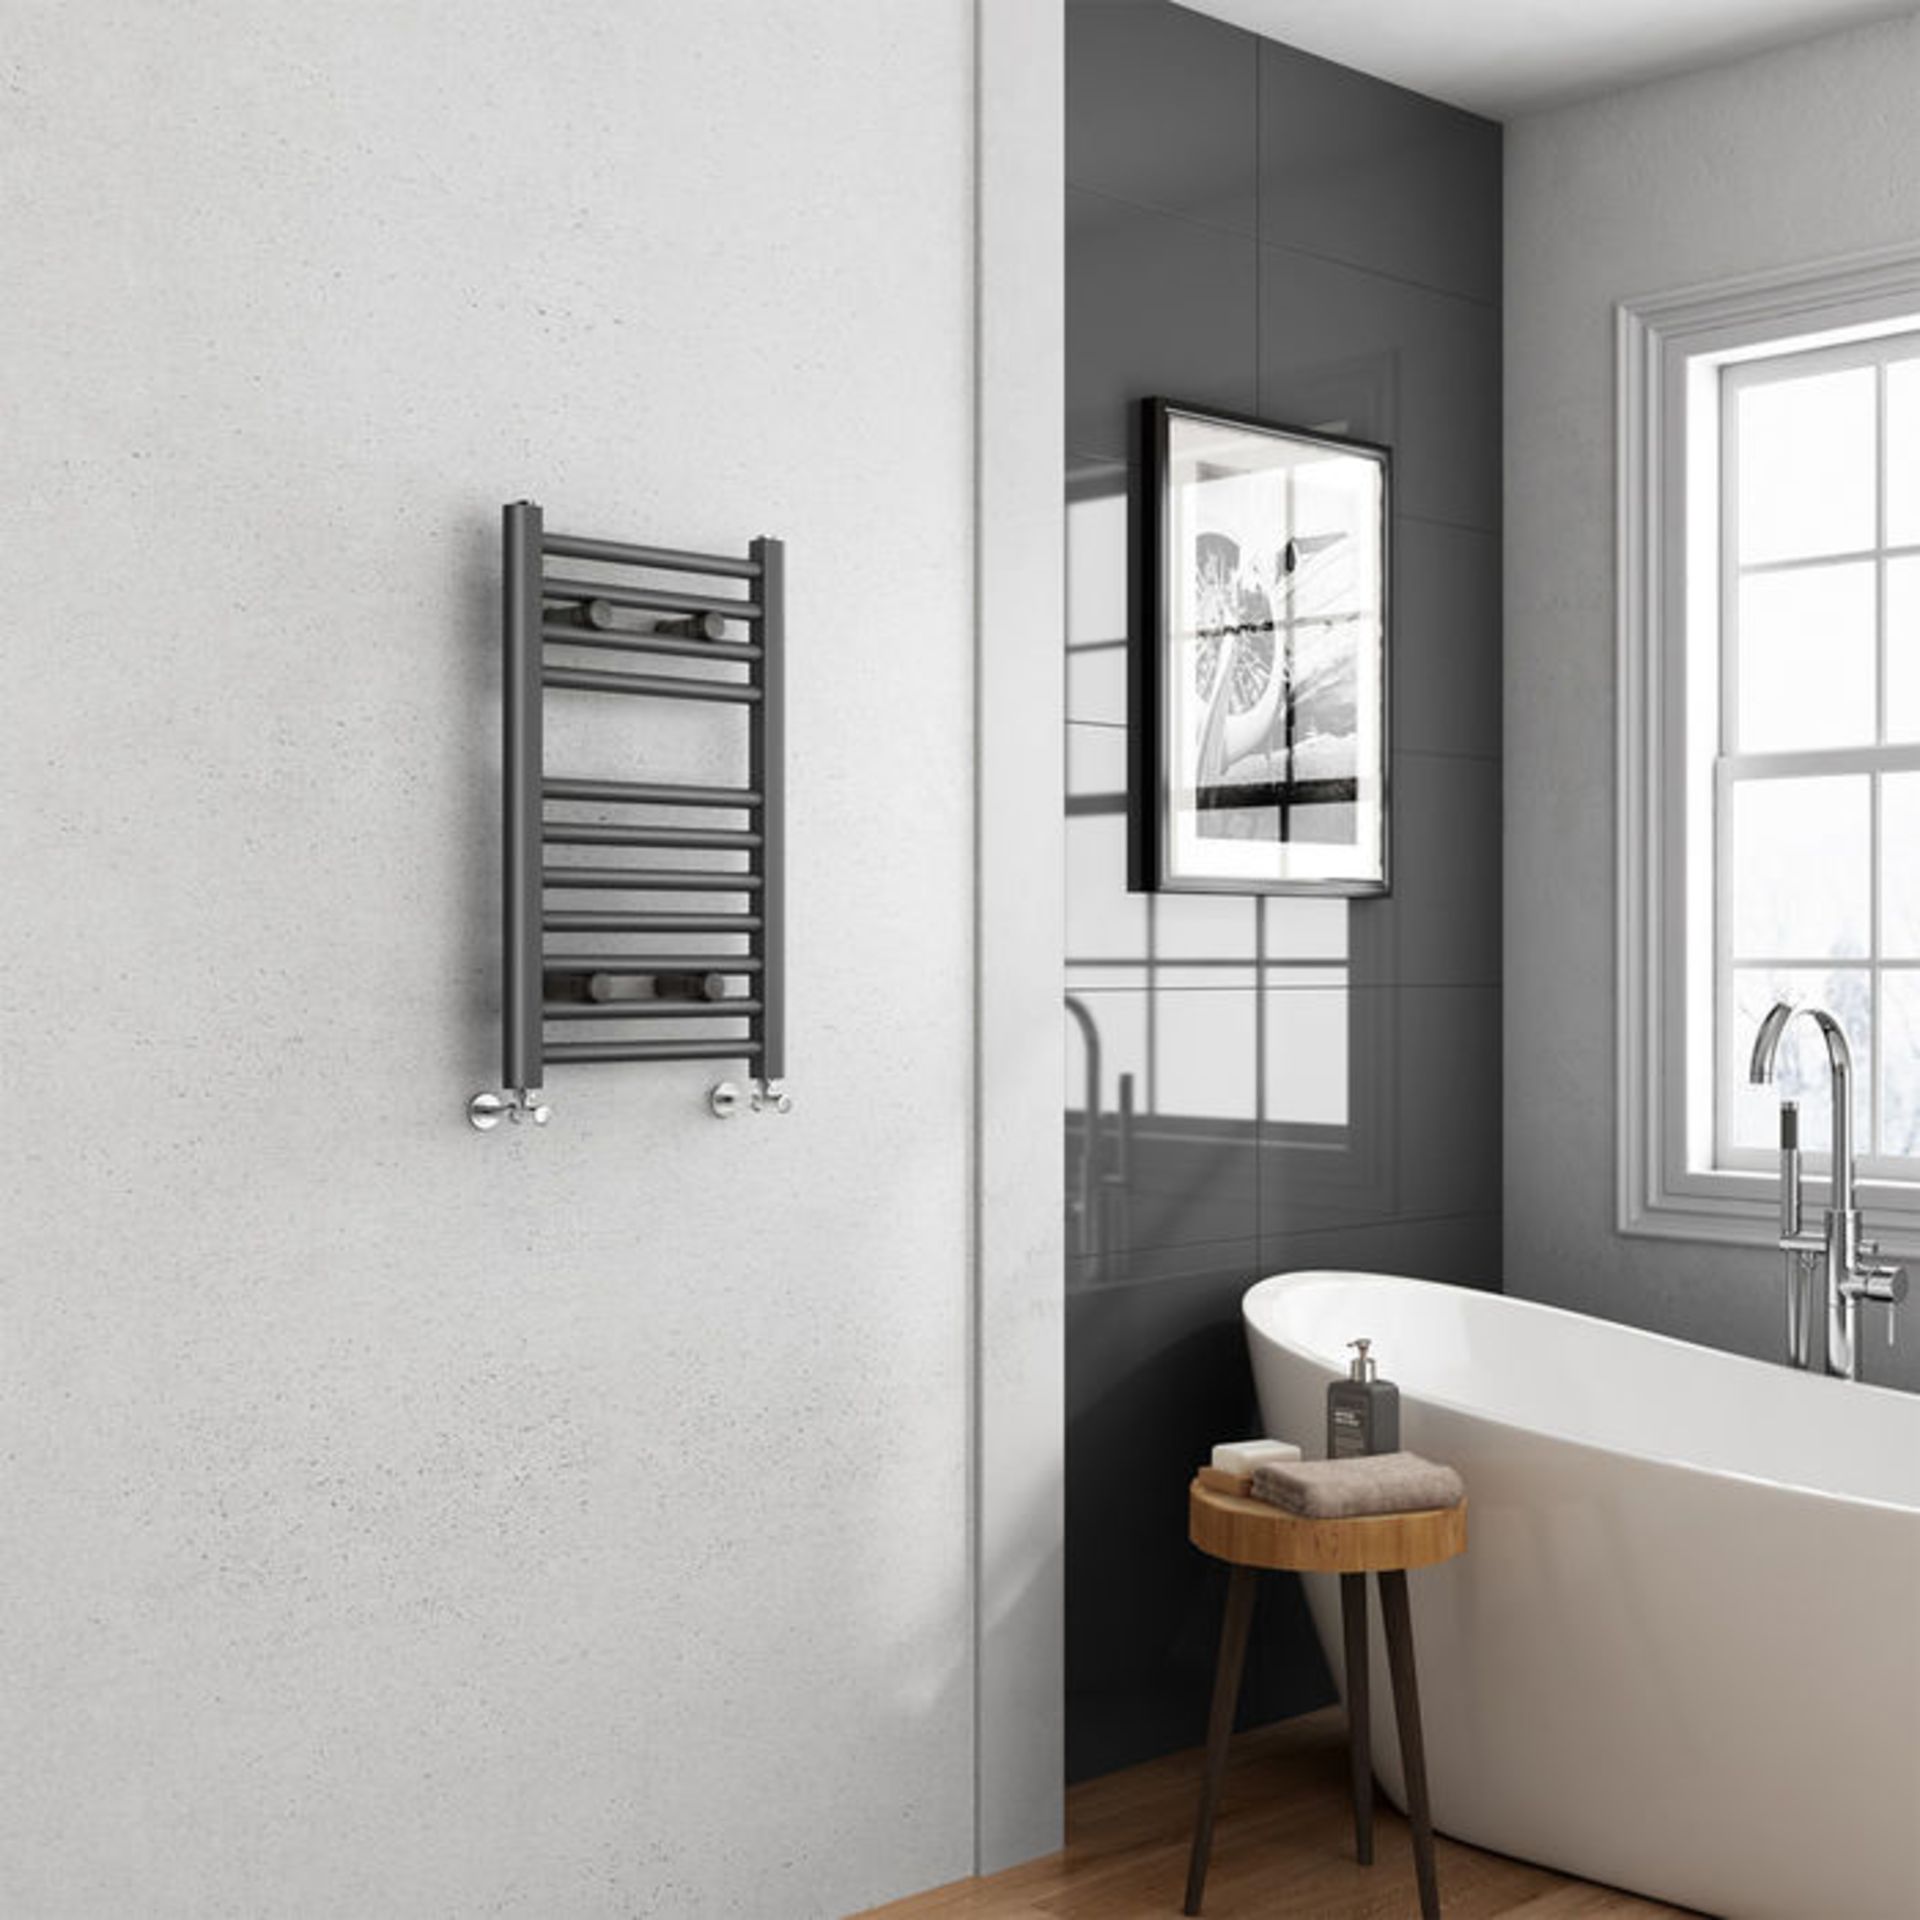 (EW196) 650x400mm - 25mm Tubes - Anthracite Heated Straight Rail Ladder Towel Radiator. RRP £177.99. - Image 2 of 3